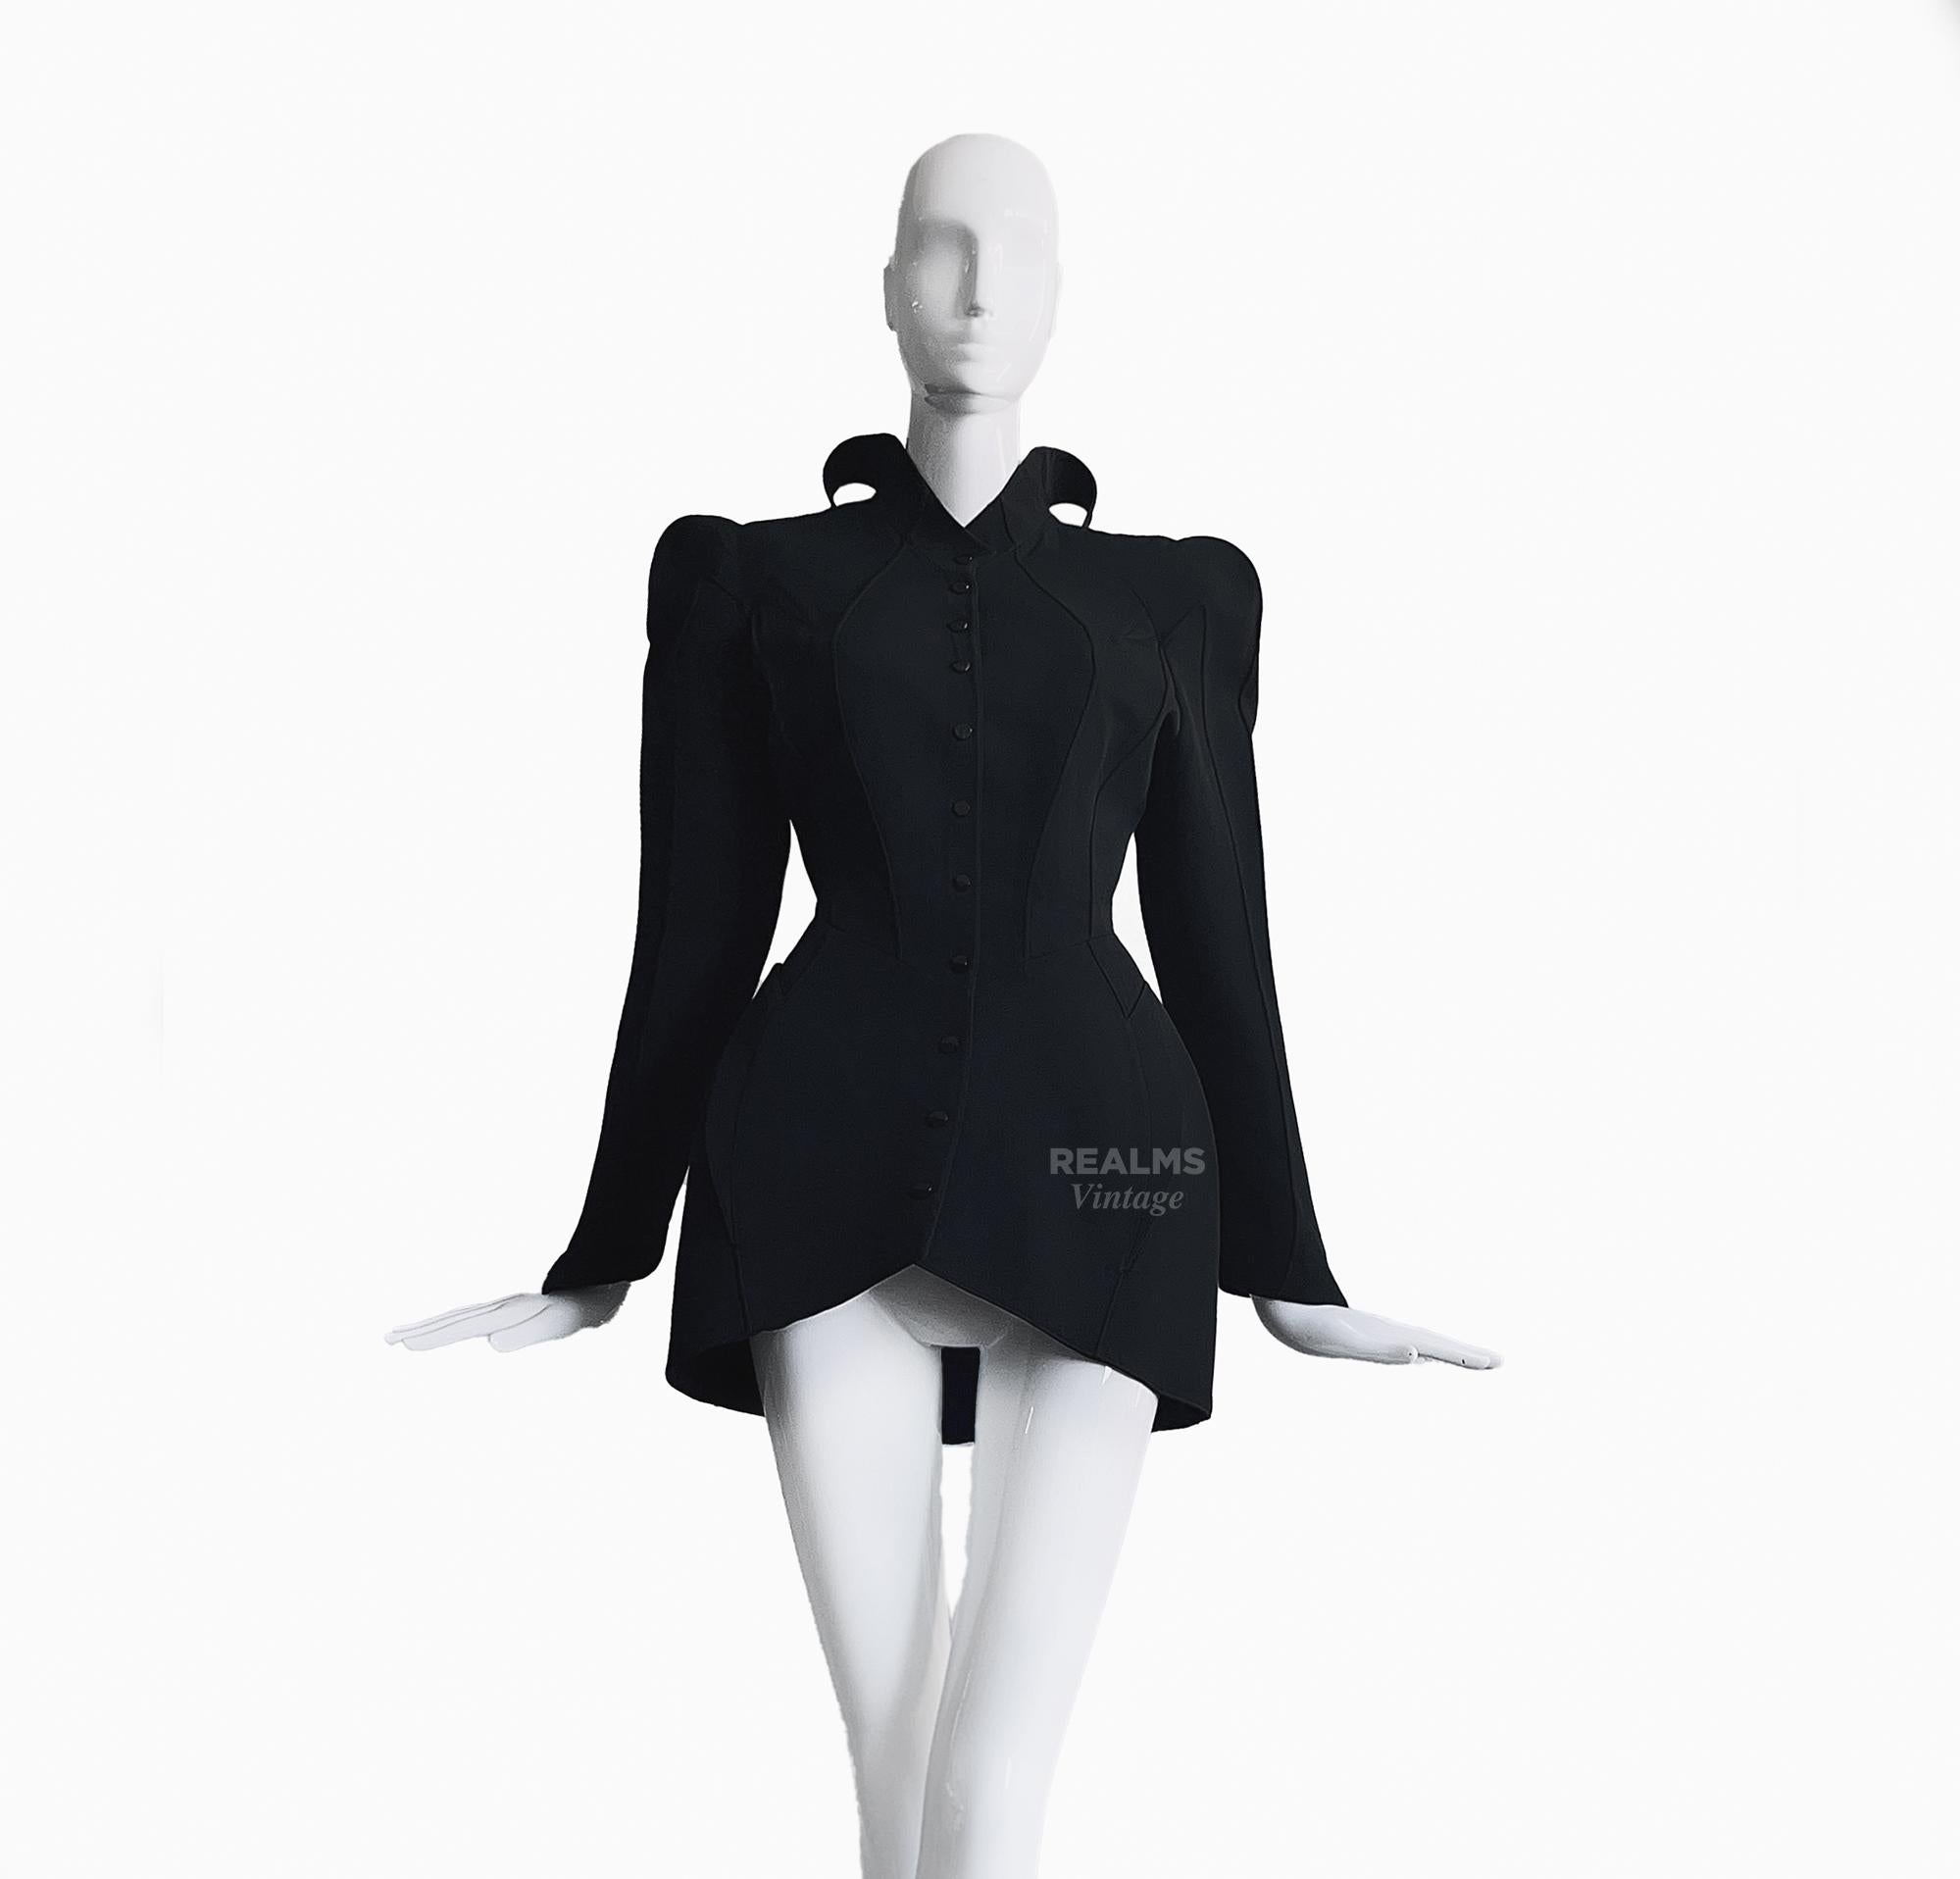 
Showstopper!
Thierry Mugler LES INFERNALES Collection FW 1988/89
Absolutely extraordinary piece! The shape and tailoring is so remarkable and the Collar is spectacular! 
Sculptural dramatic black two piece set: Jacket and Skirt.

This truly is